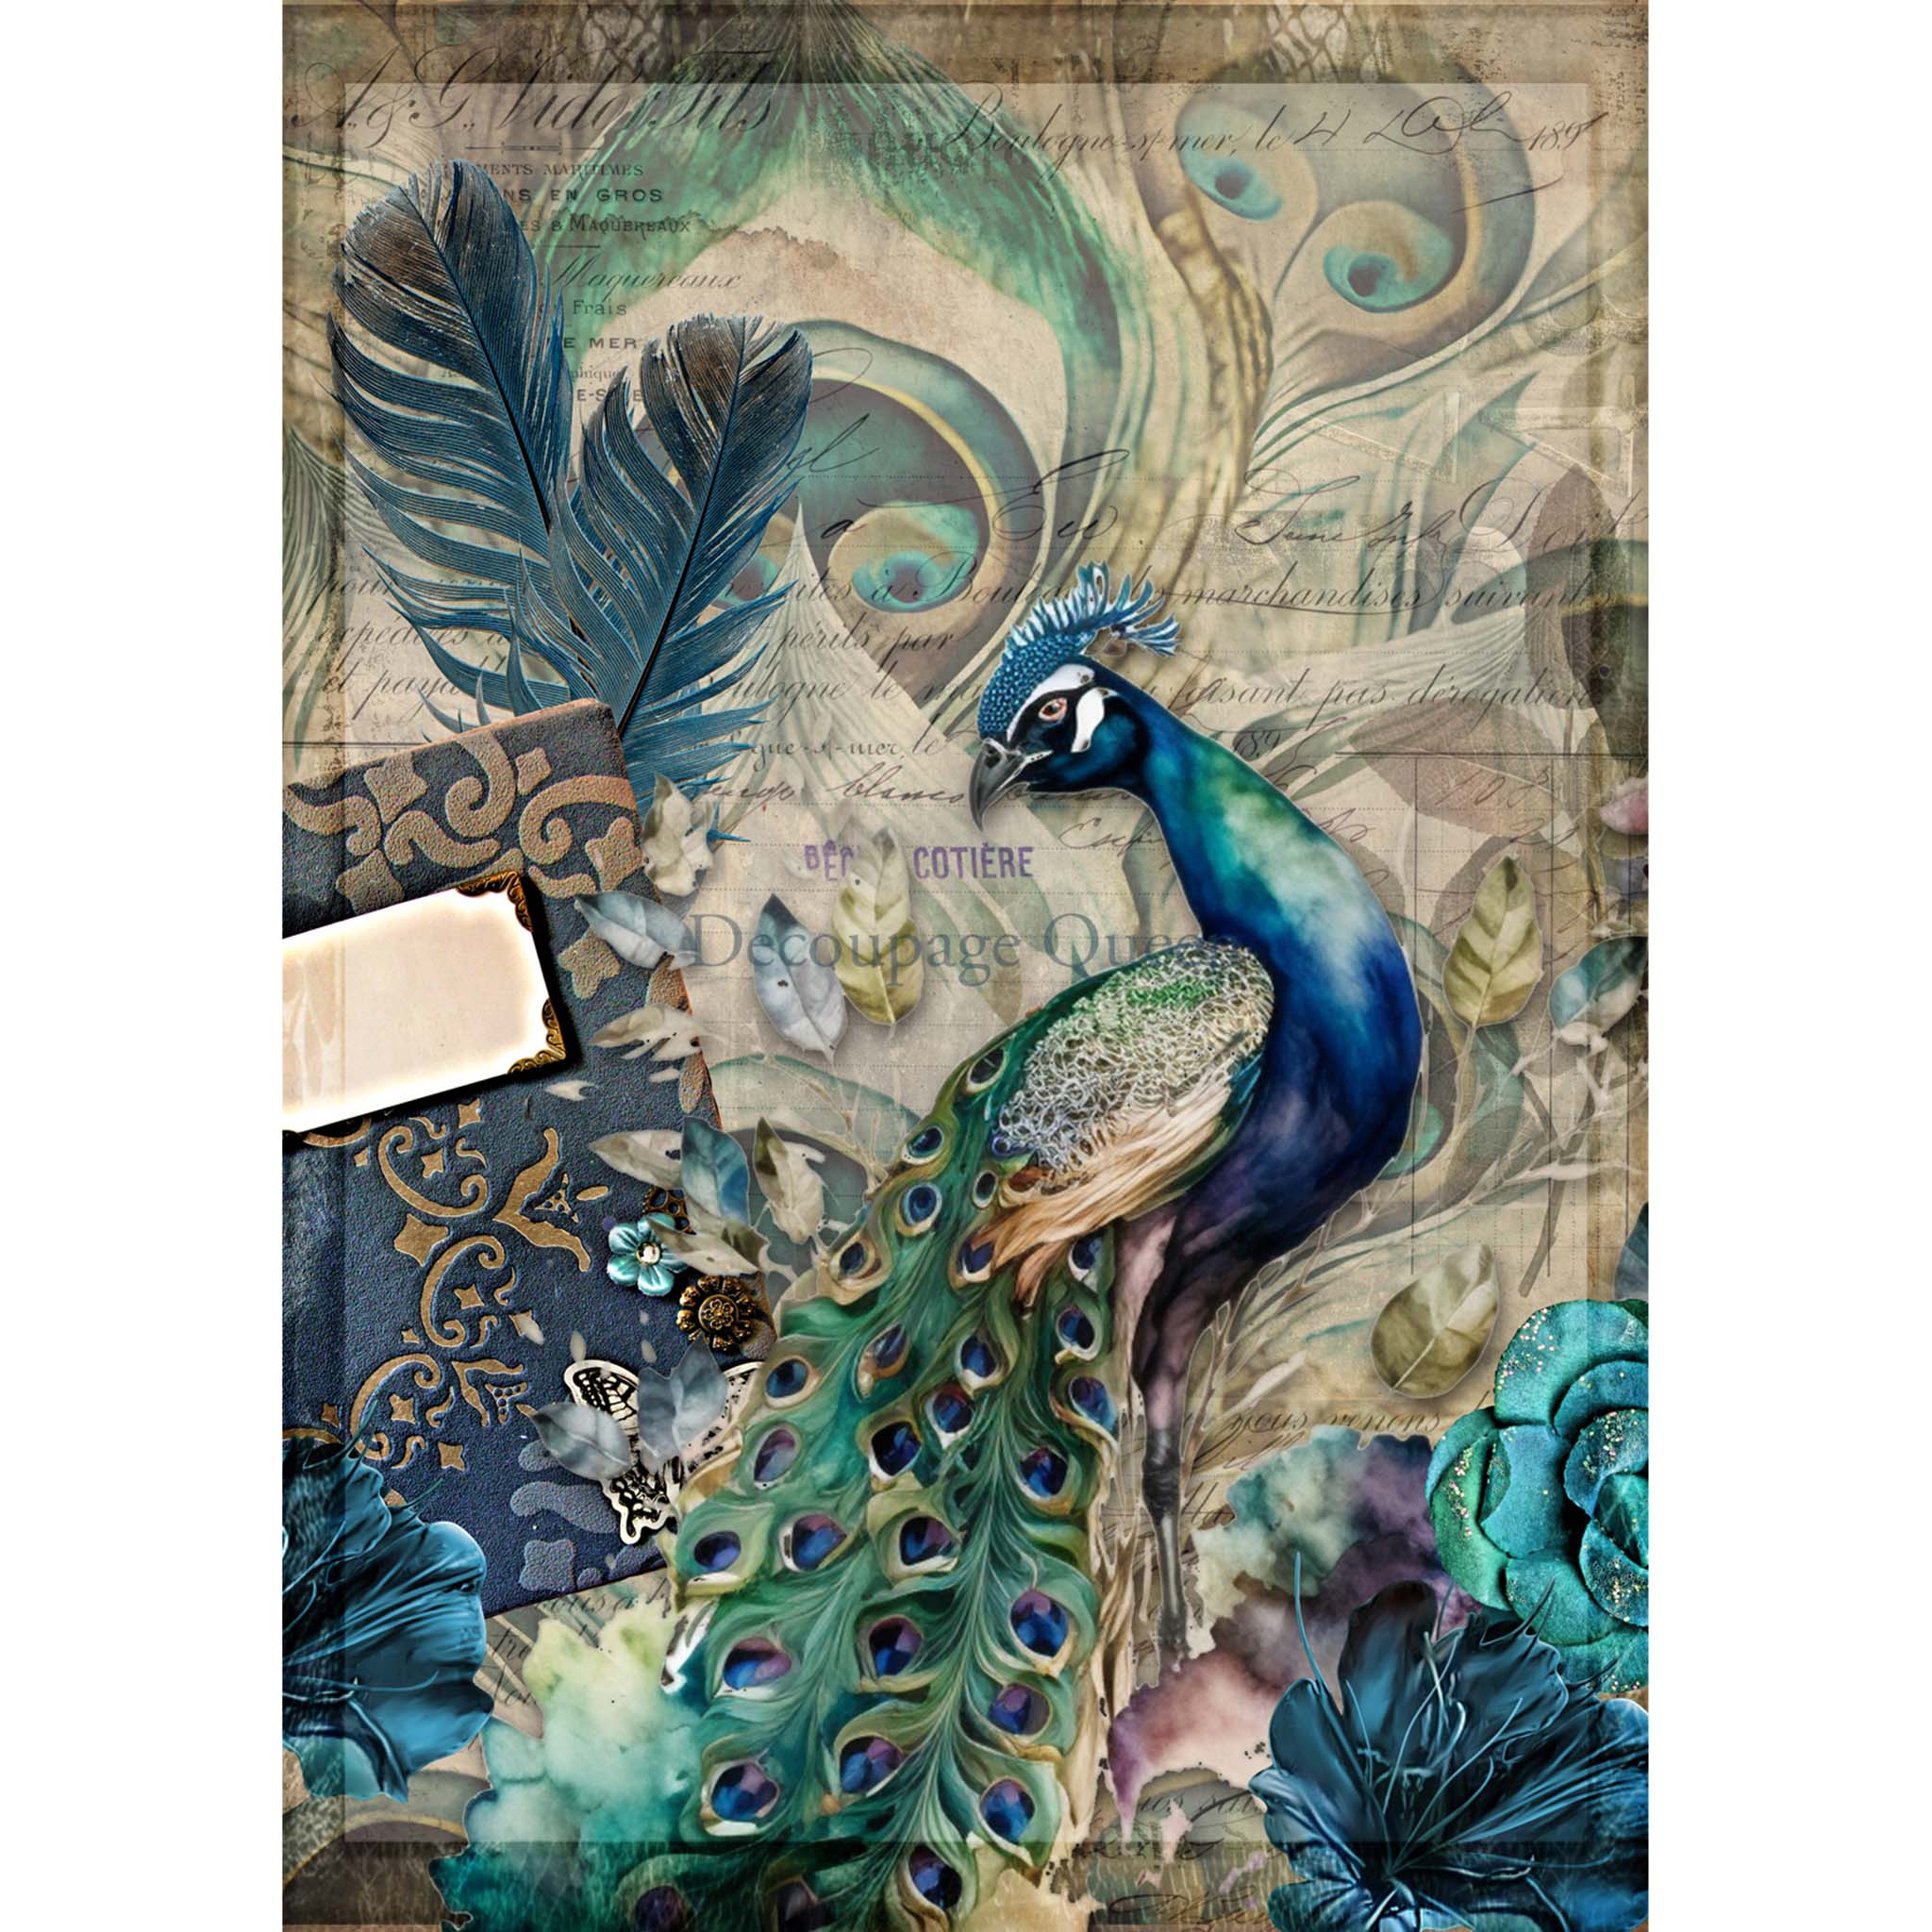 A3 rice paper design that features a vintage document adorned with a majestic peacock and delicate florals. White borders are on the sides.